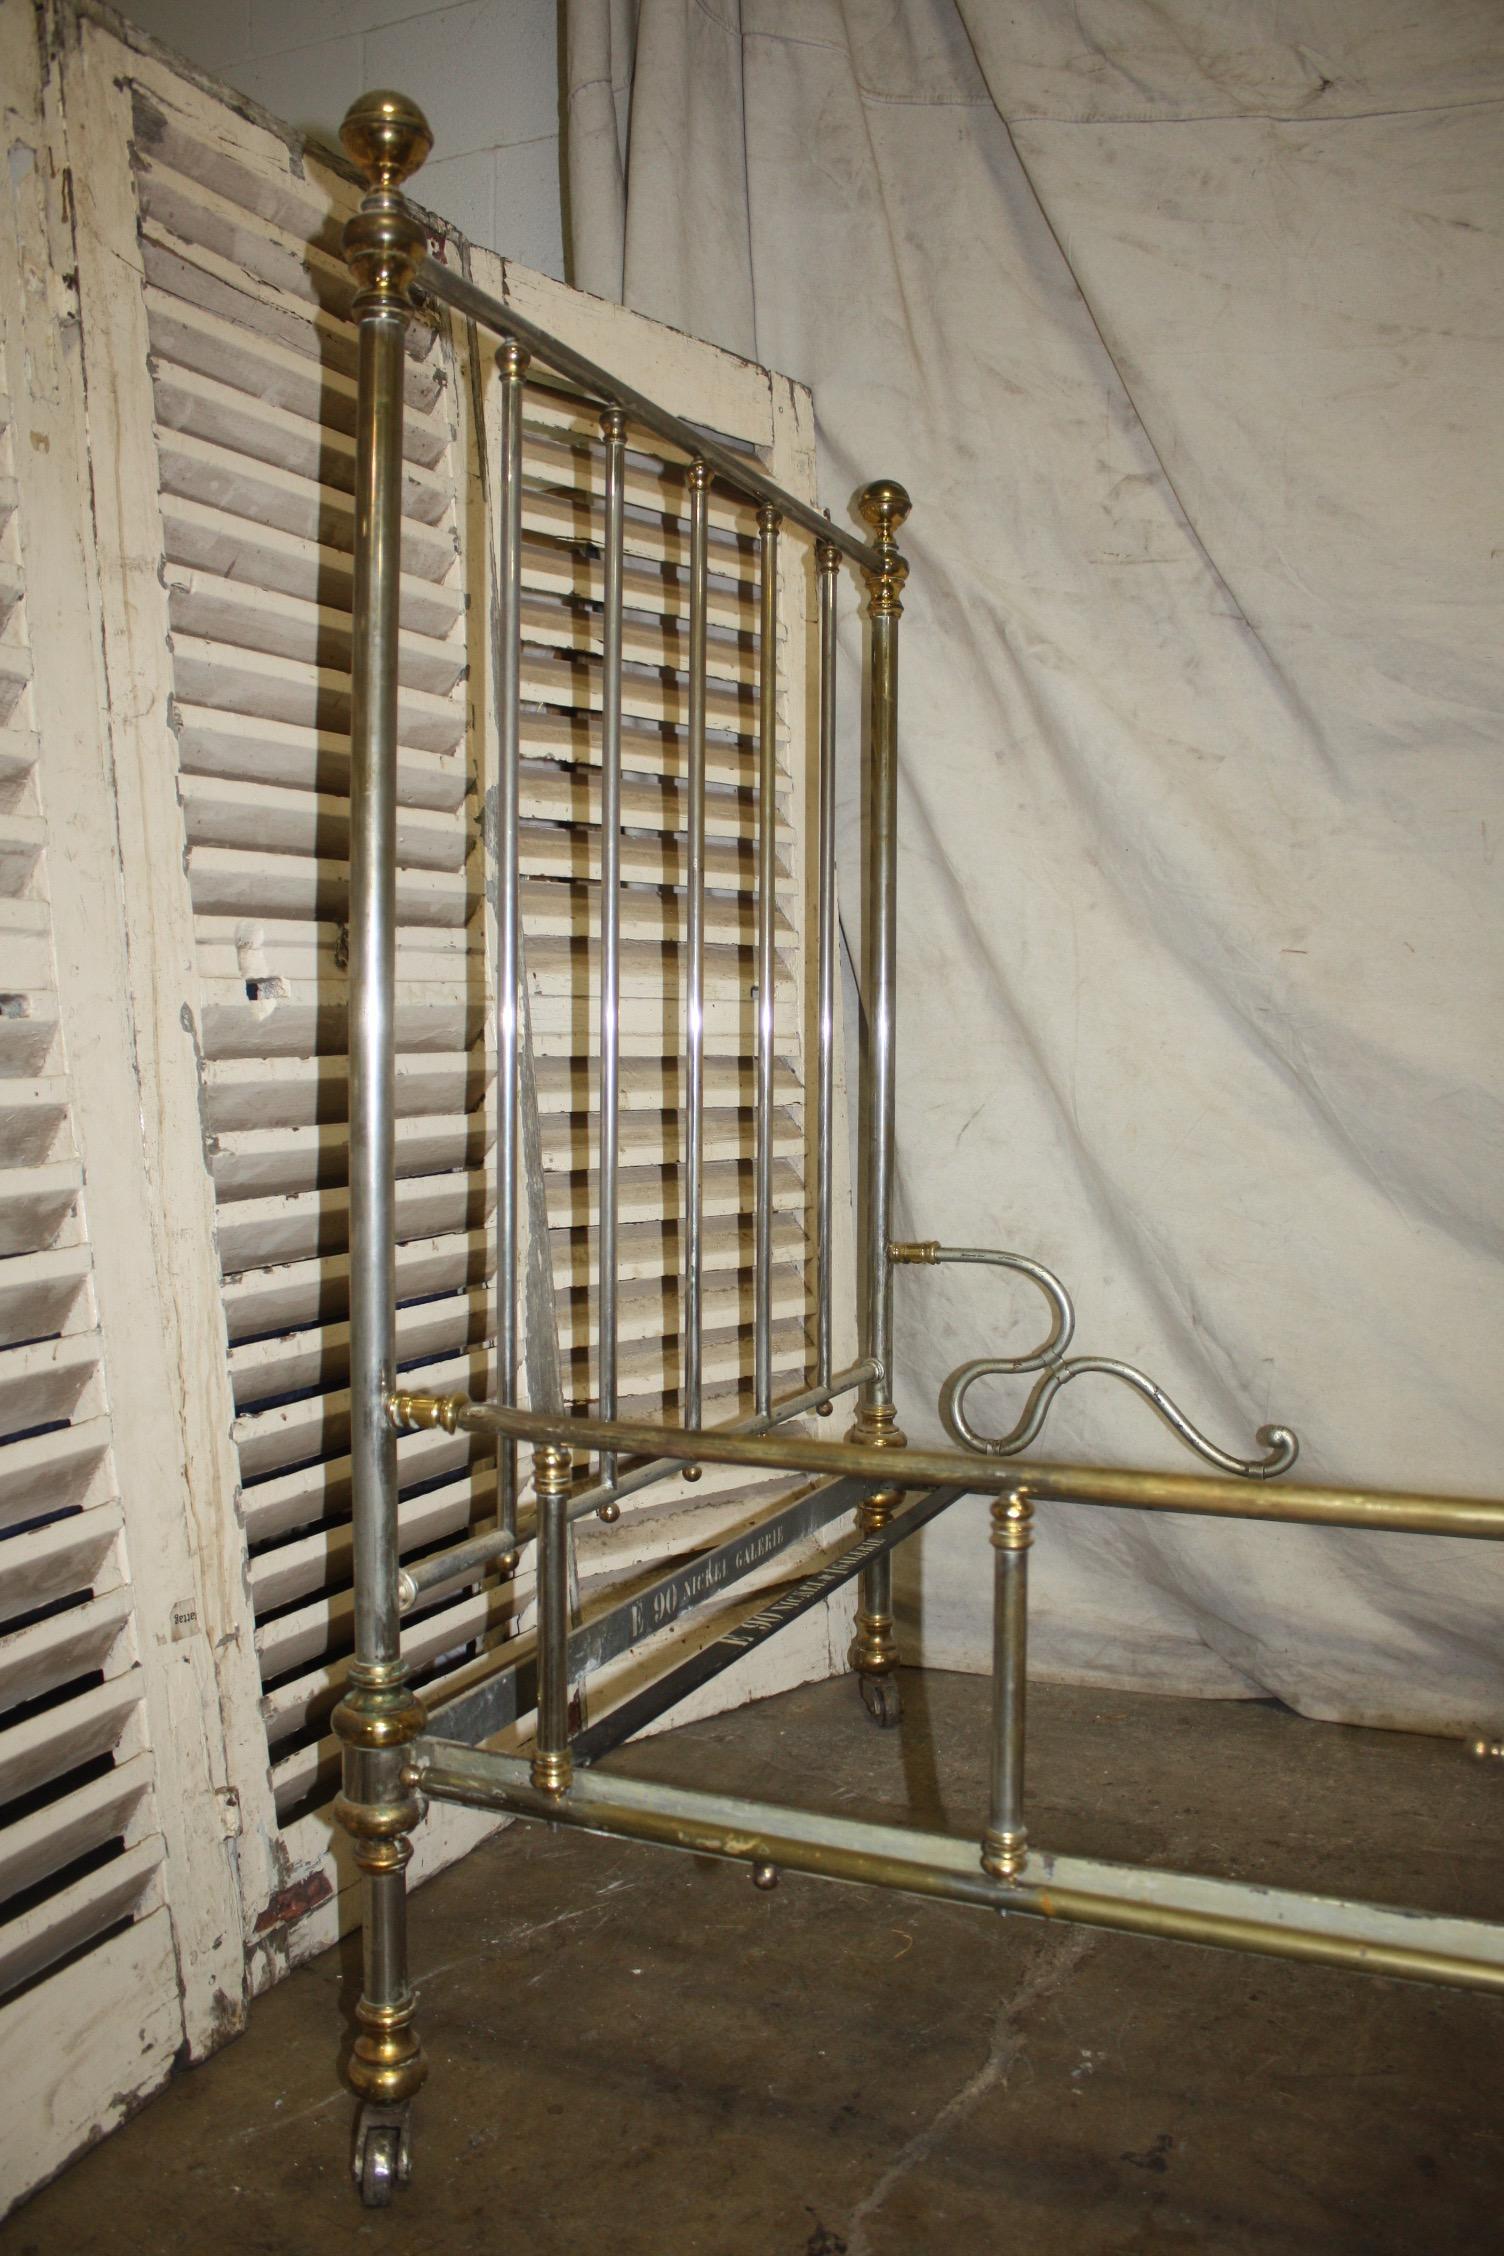 Early 20th Century Iron Bed In Good Condition For Sale In Stockbridge, GA